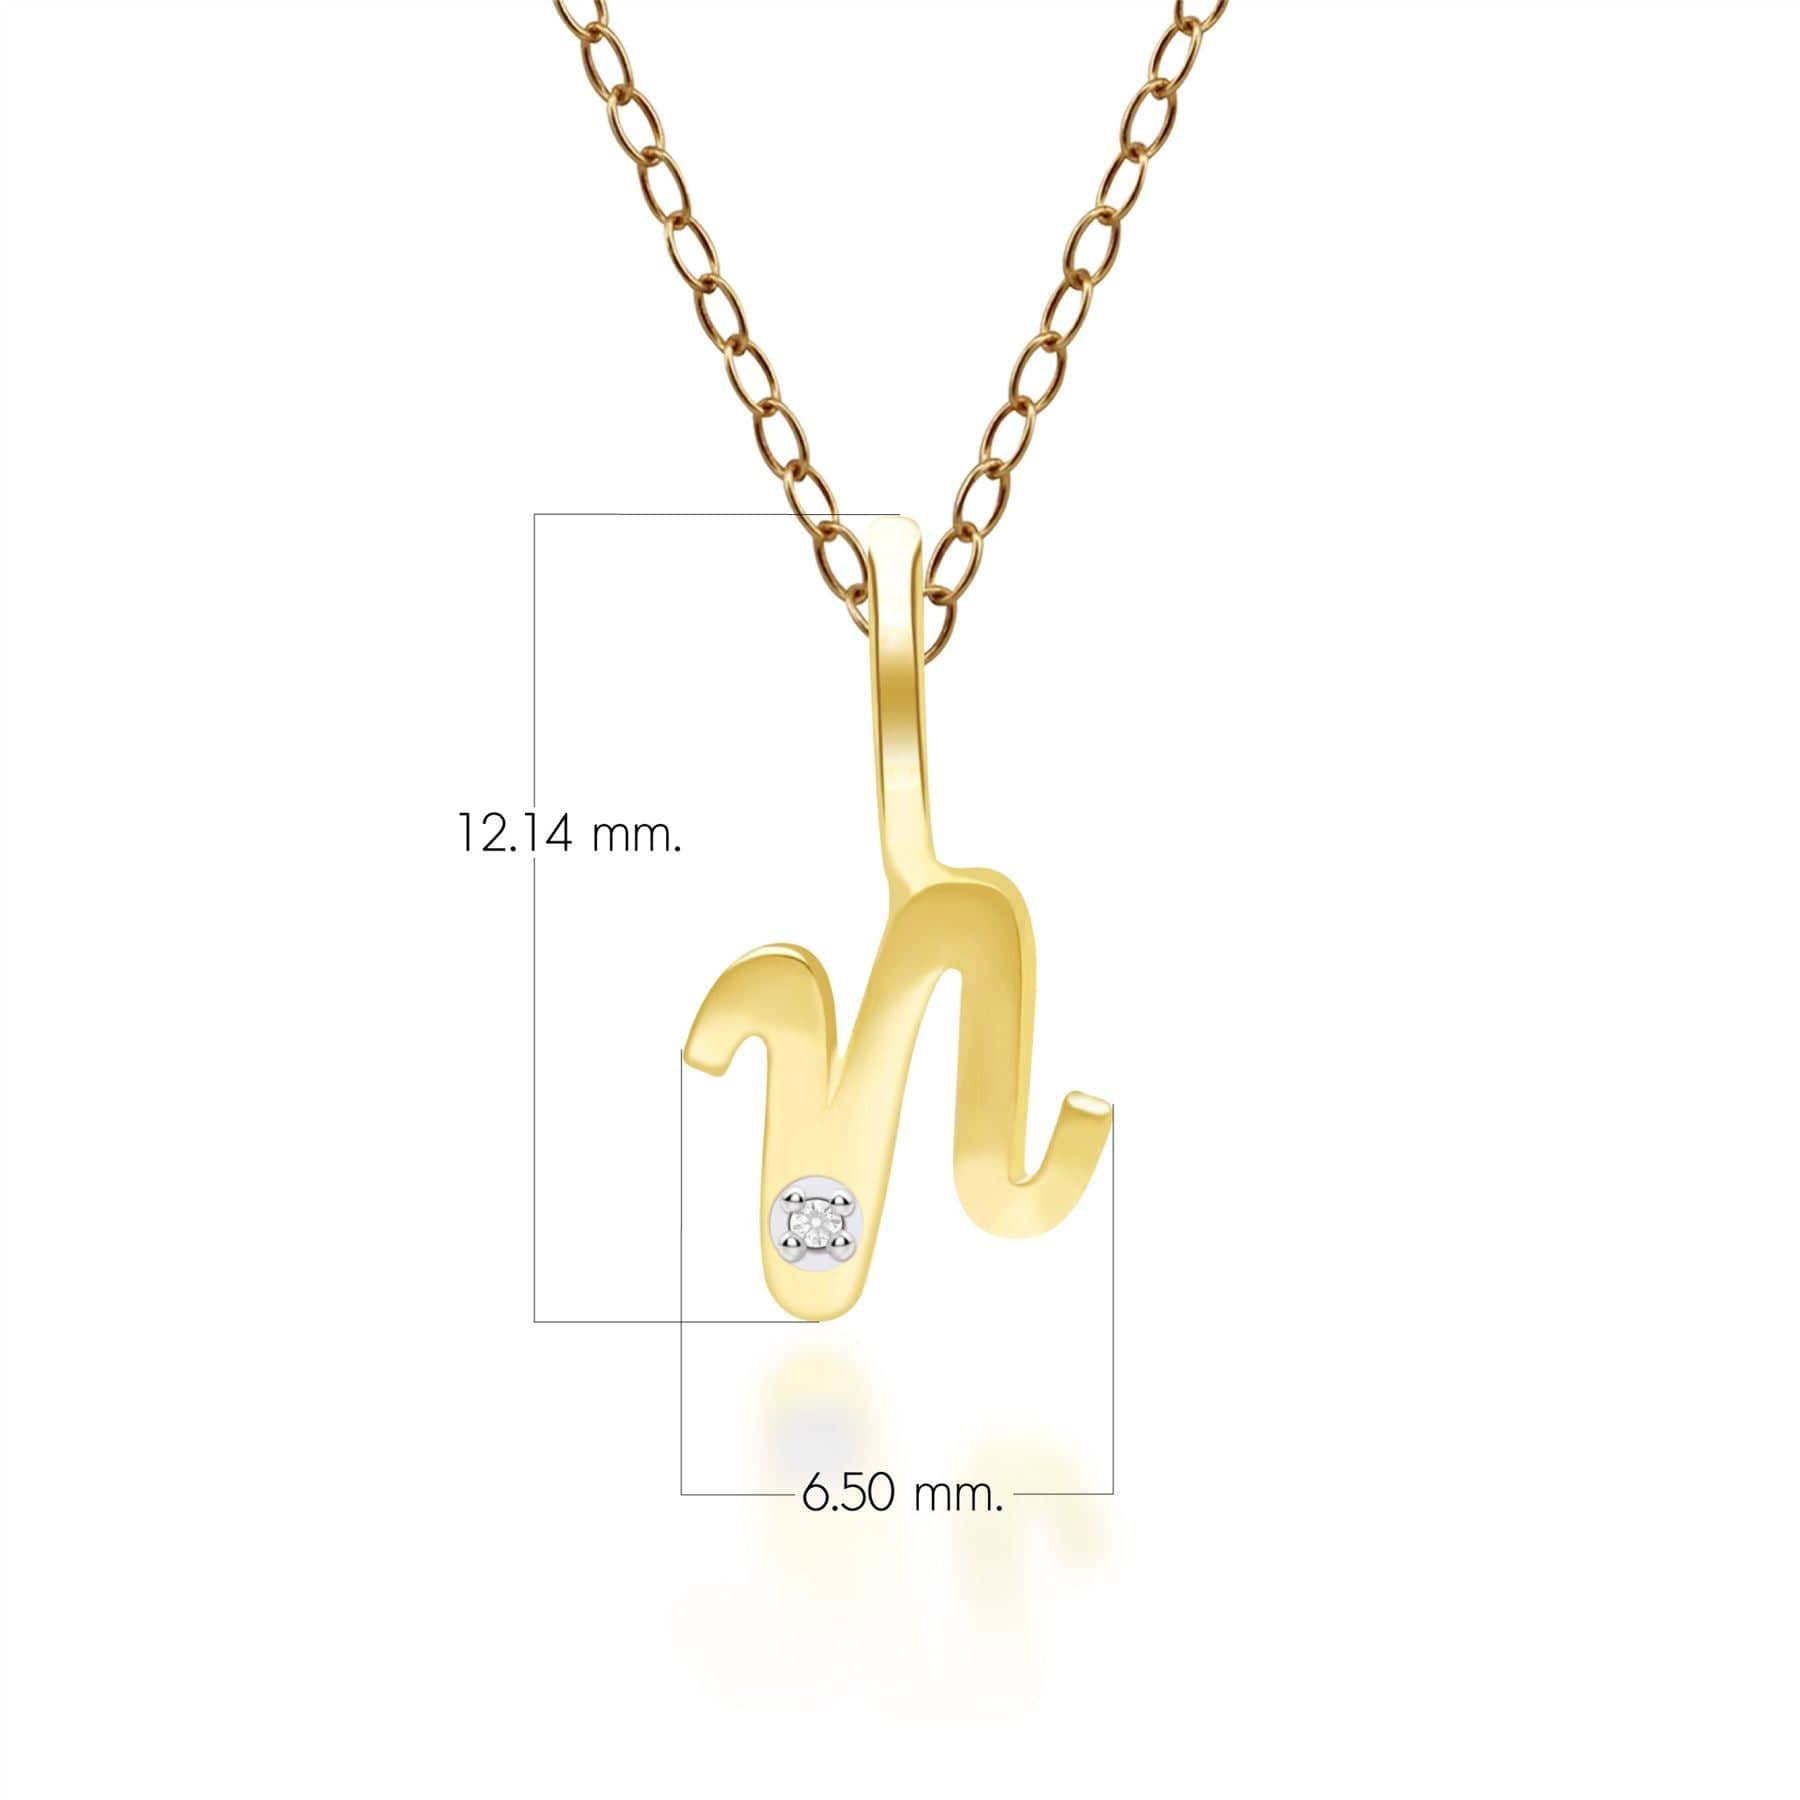 191P0785019 Alphabet Letter N Diamond pendant in 9ct Yellow Gold Dimensions